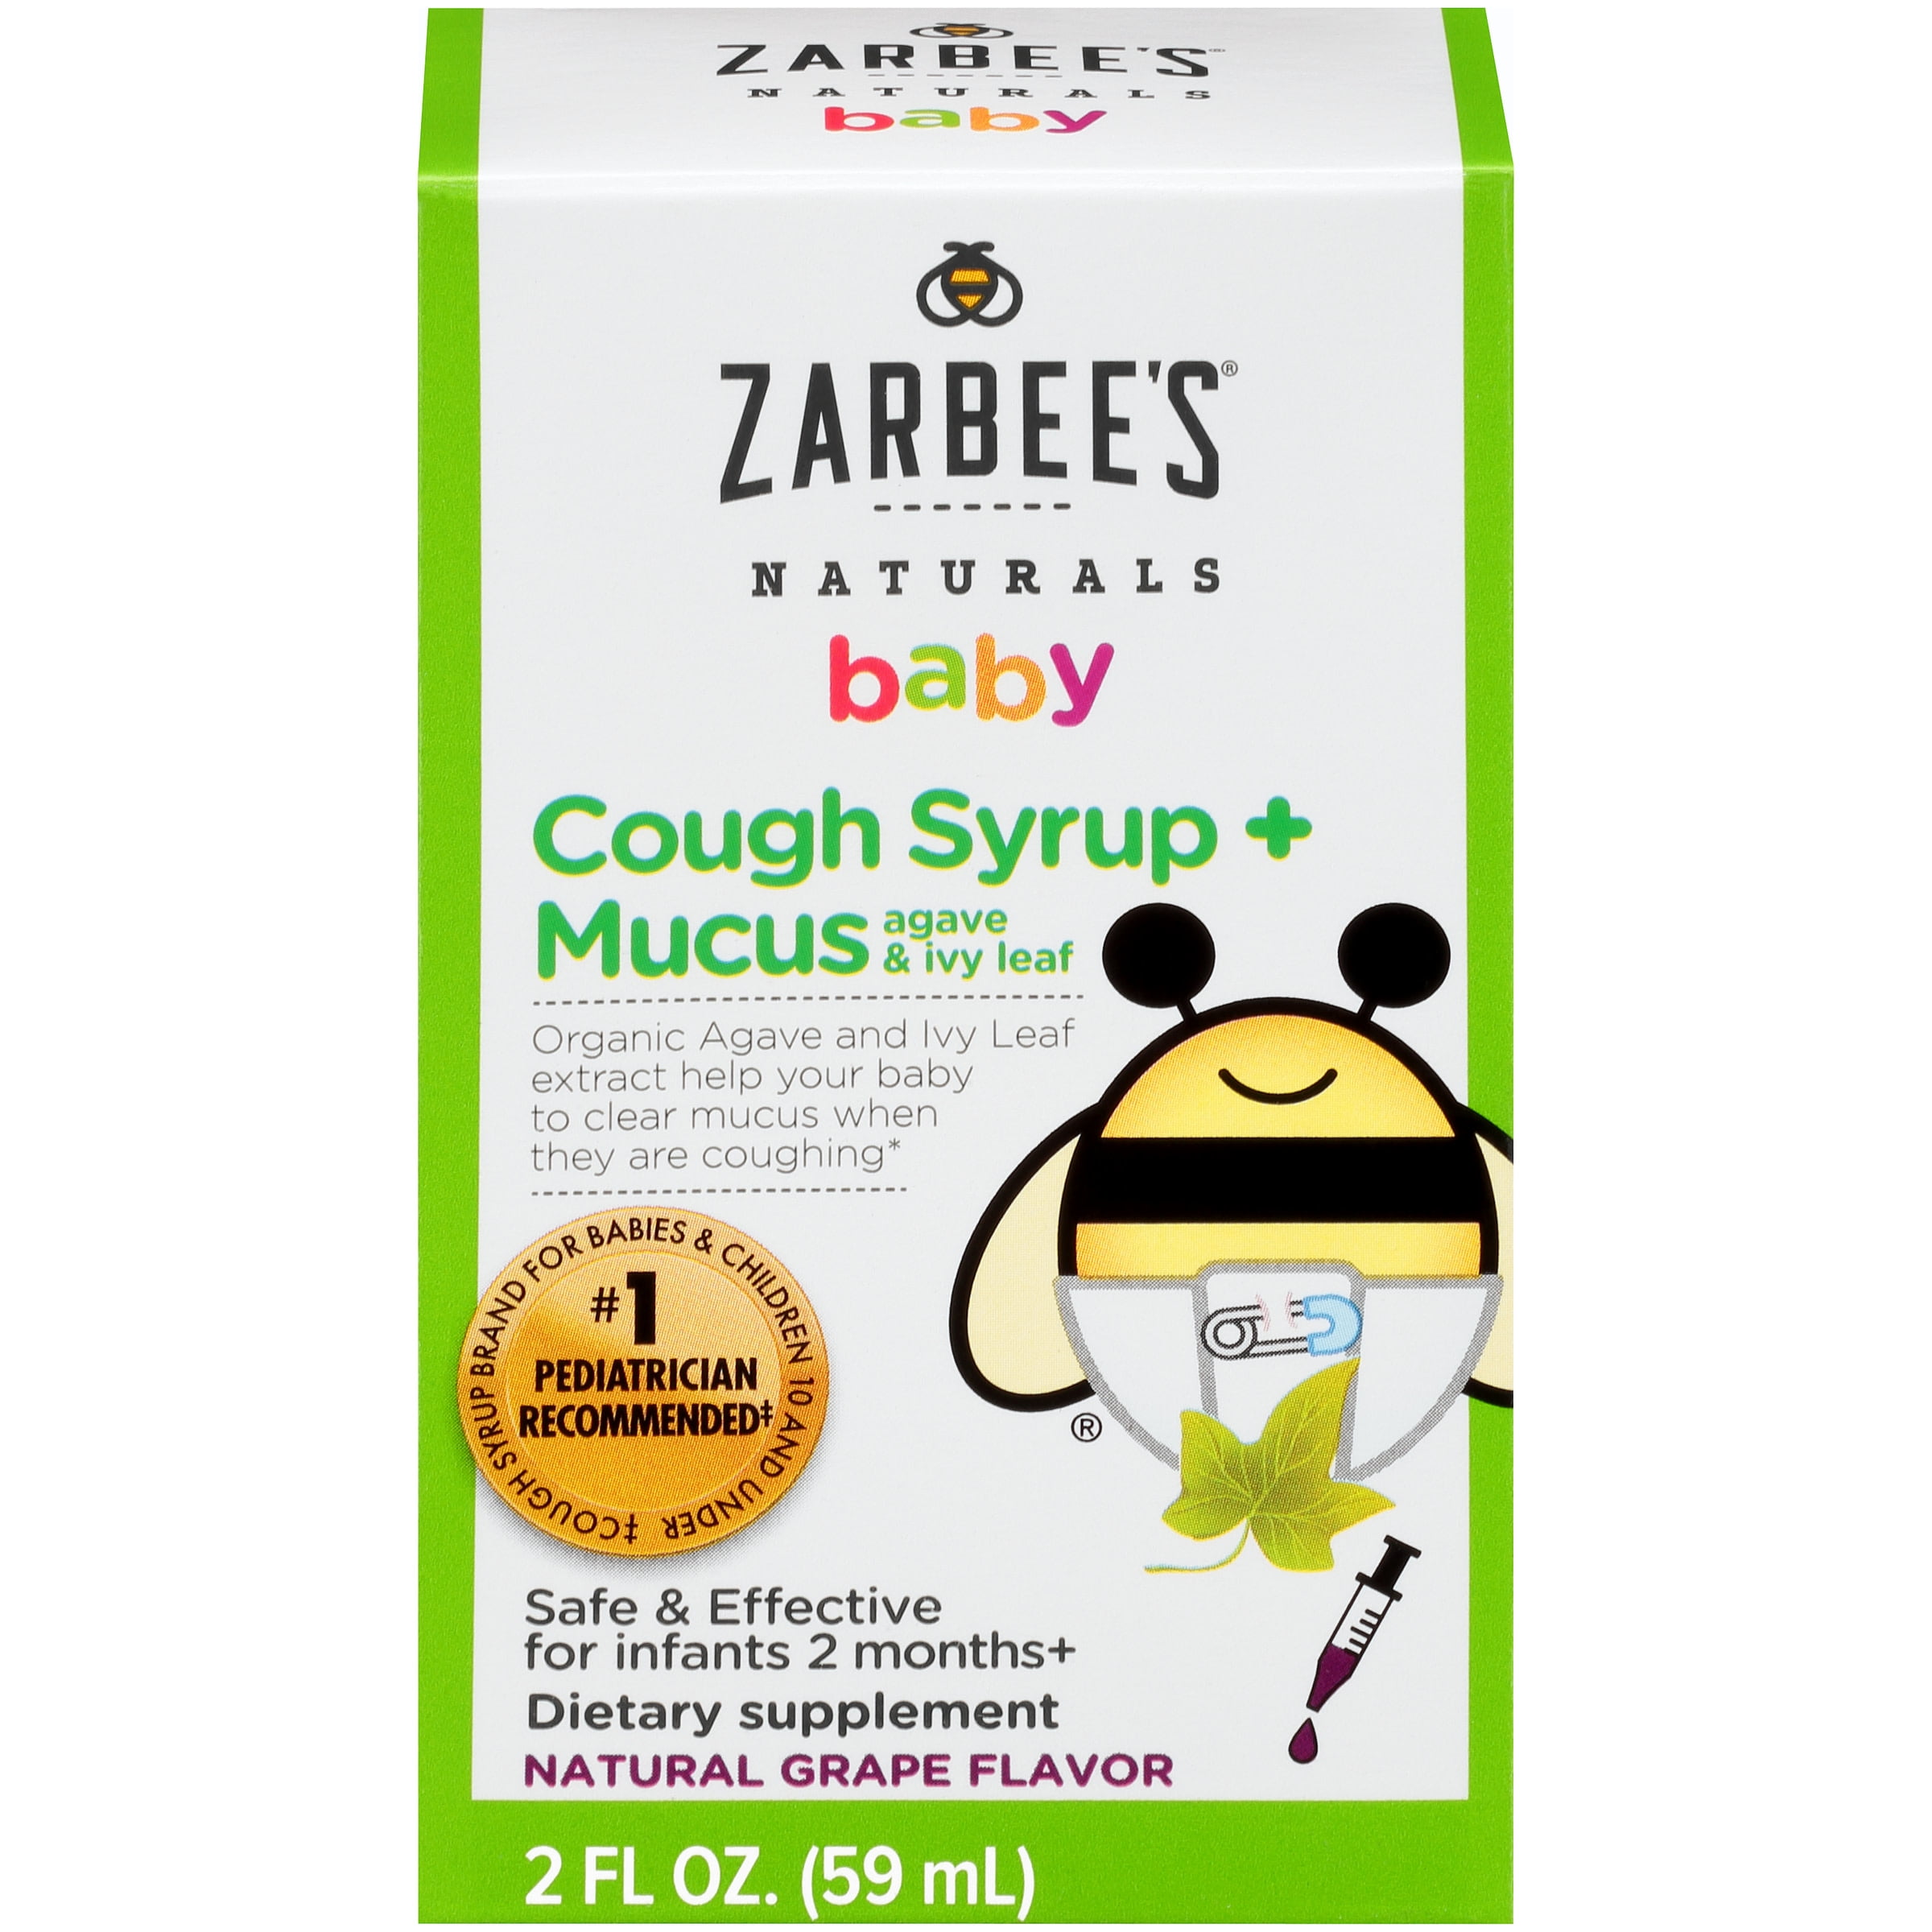 Zarbee's Naturals Baby Cough Syrup + Mucus, Natural Grape, 2 fl oz